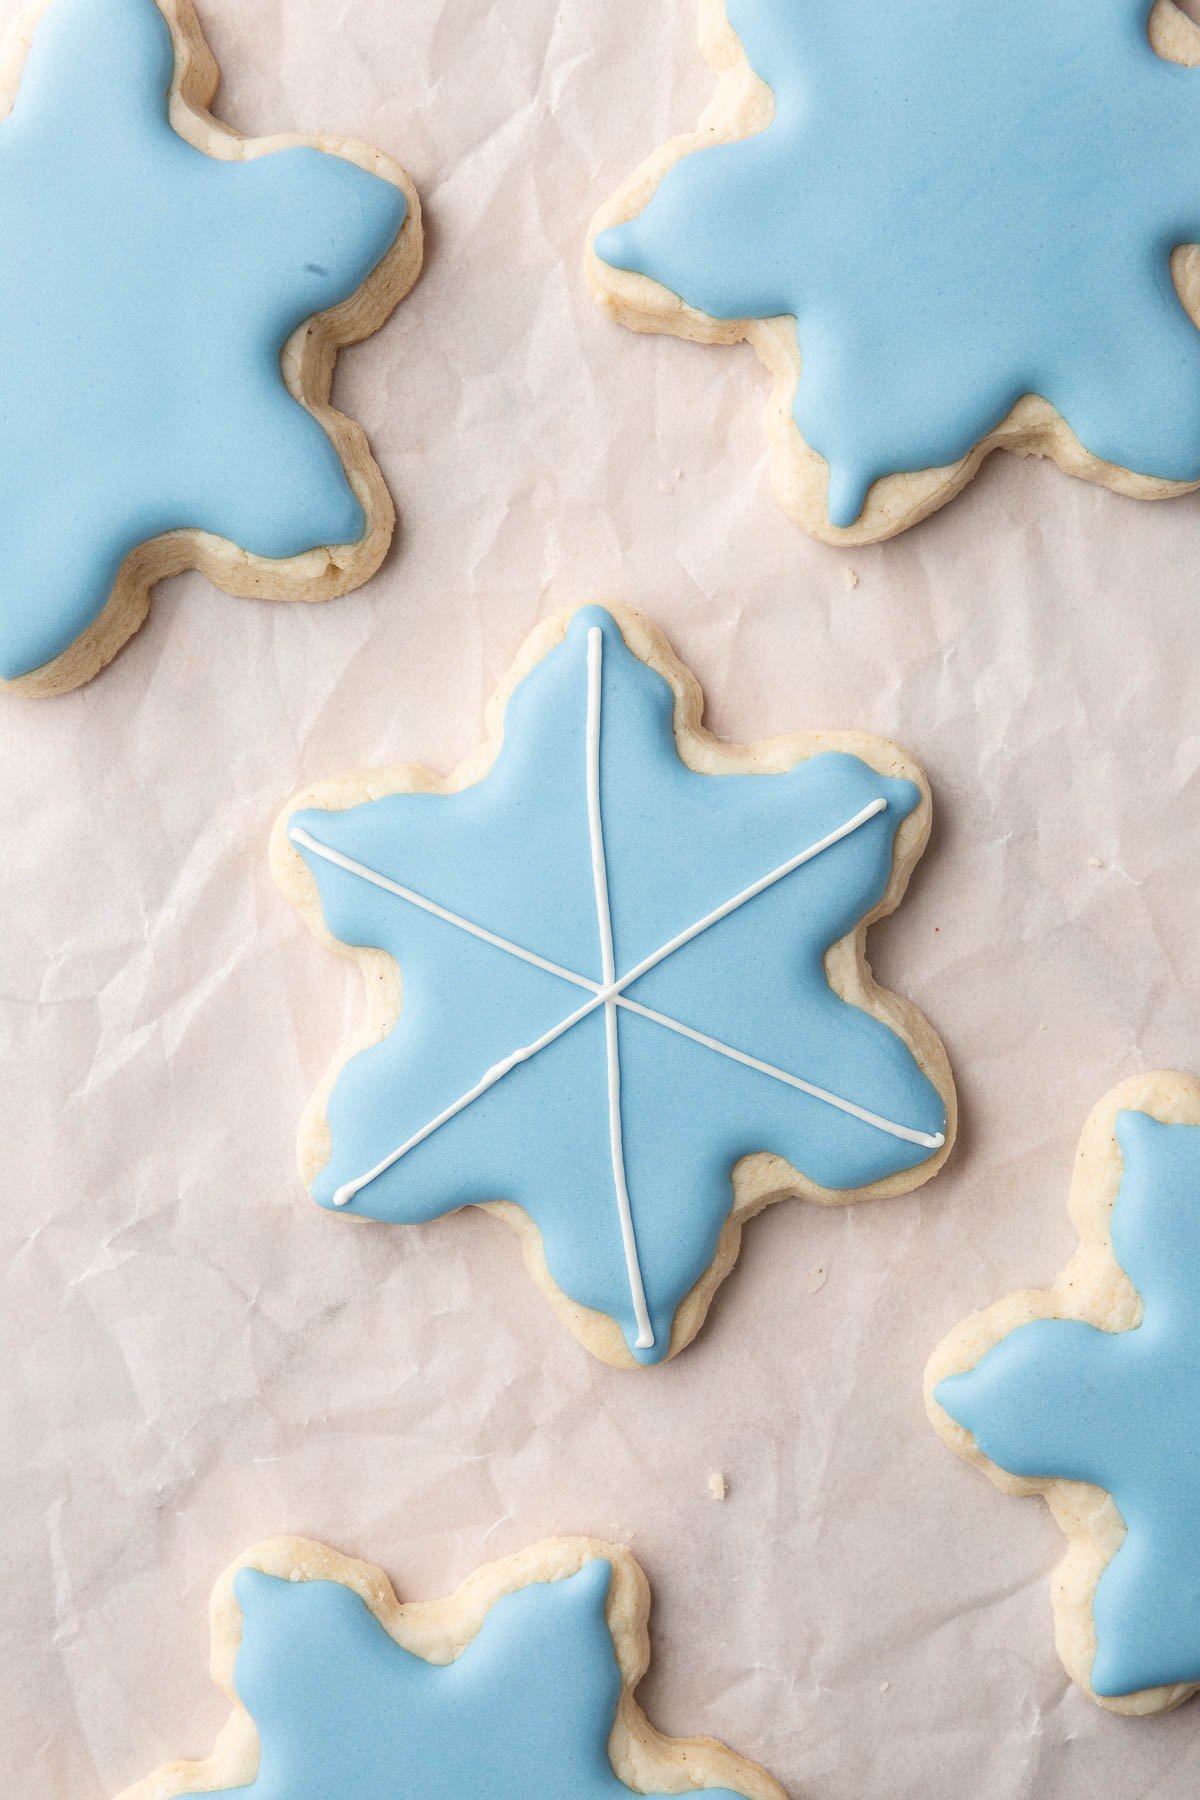 A few gluten-free snowflake sugar cookies decorated with blue royal icing with one having white royal icing stripes on top.